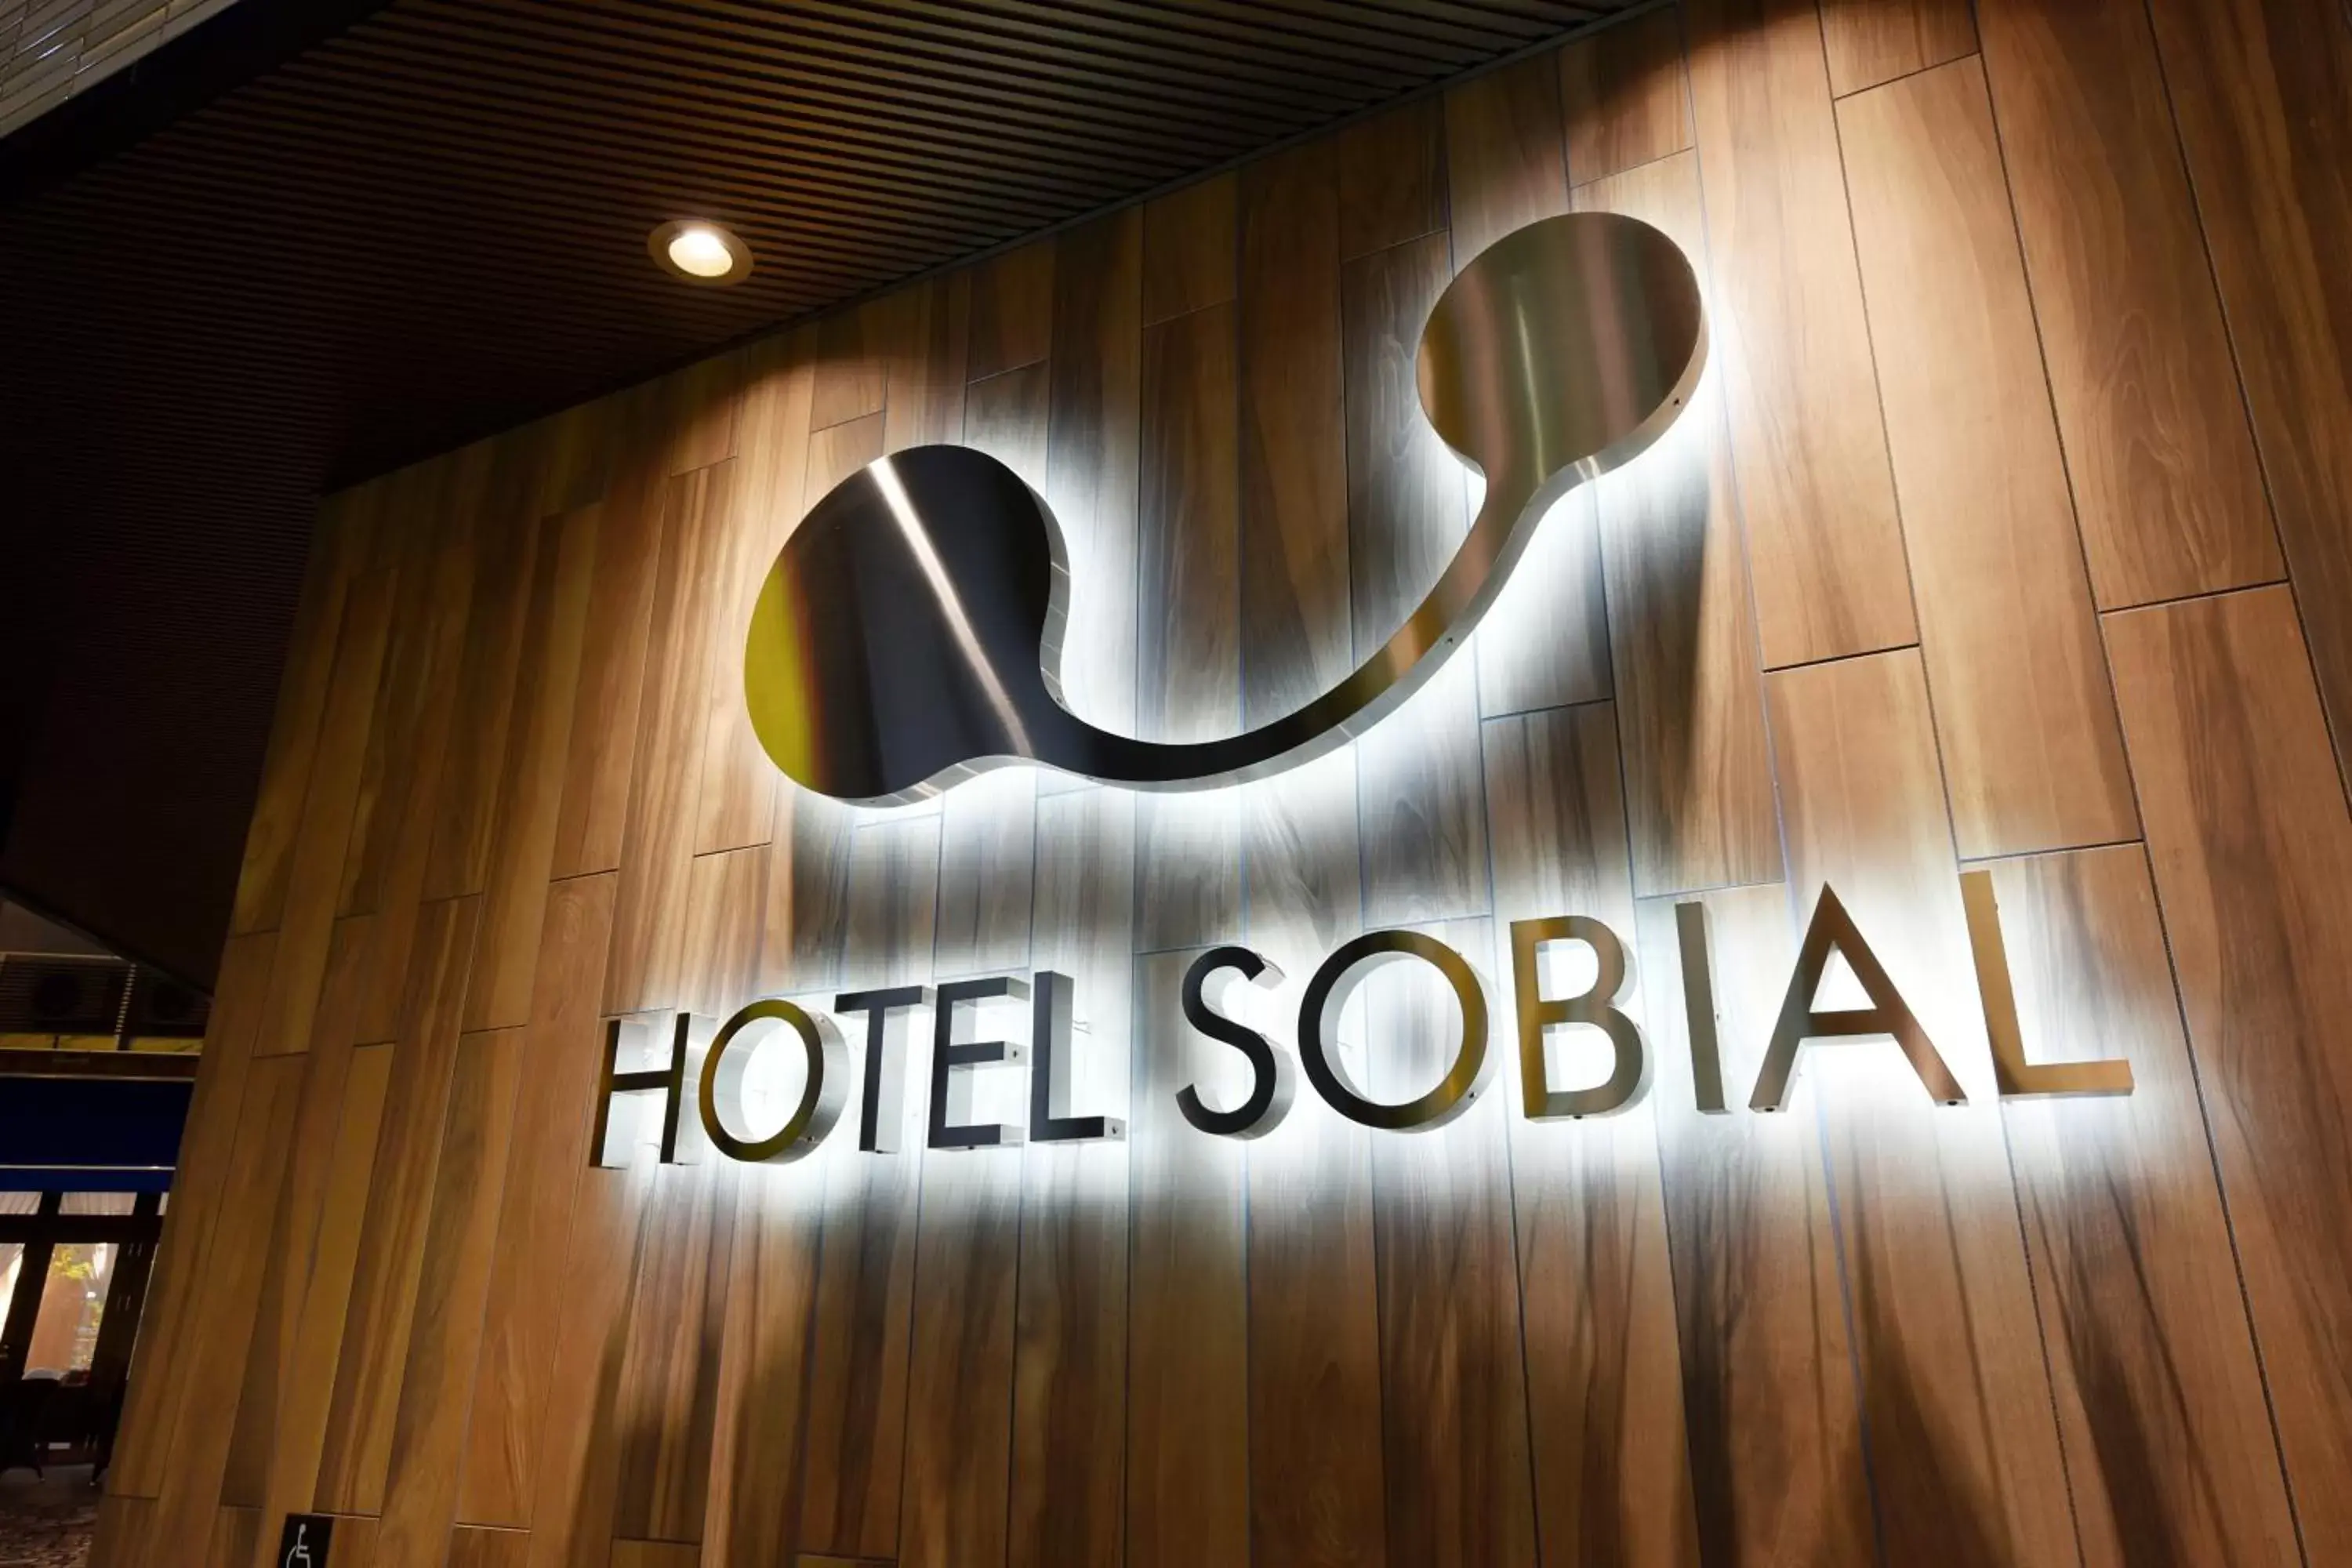 Property logo or sign, Logo/Certificate/Sign/Award in Hotel Sobial Osaka Dome